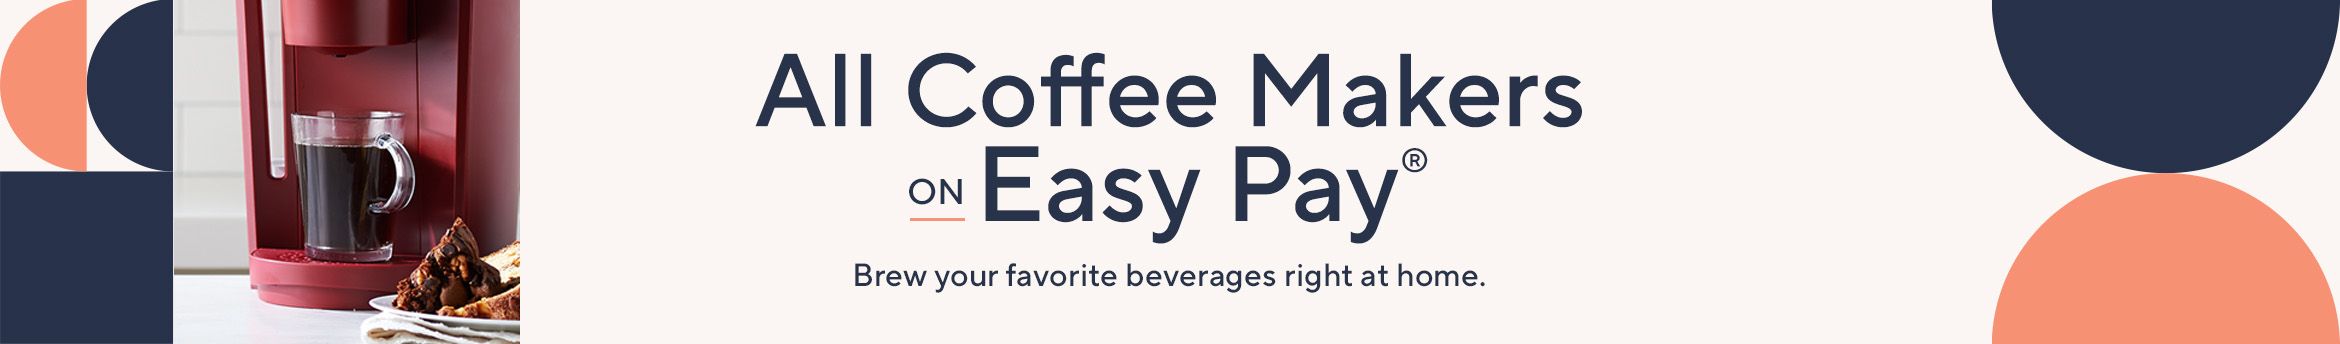 All Coffee Makers on Easy Pay®  Brew up your favorite beverages right at home.